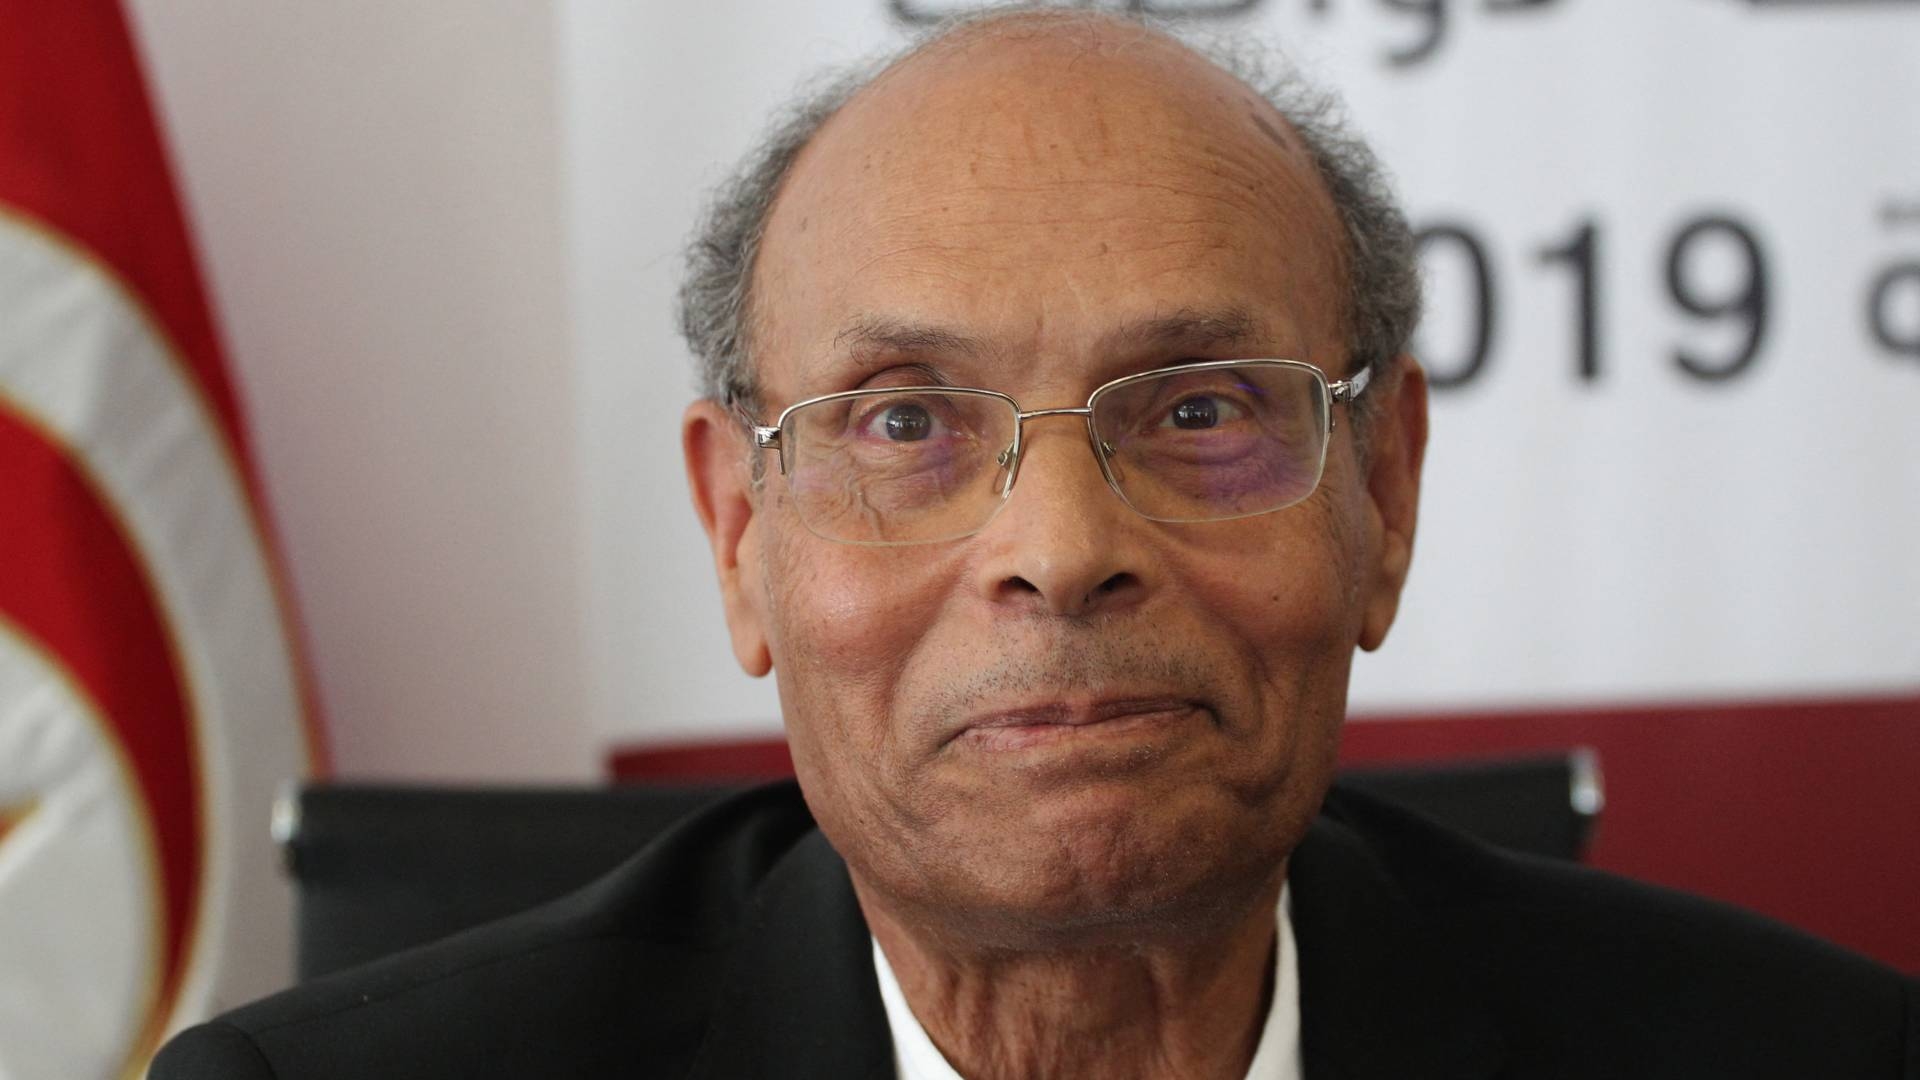 Marzouki previously told Al Jazeera Arabic that the arrest warrant placed on him was a dangerous situation for all Tunisians.